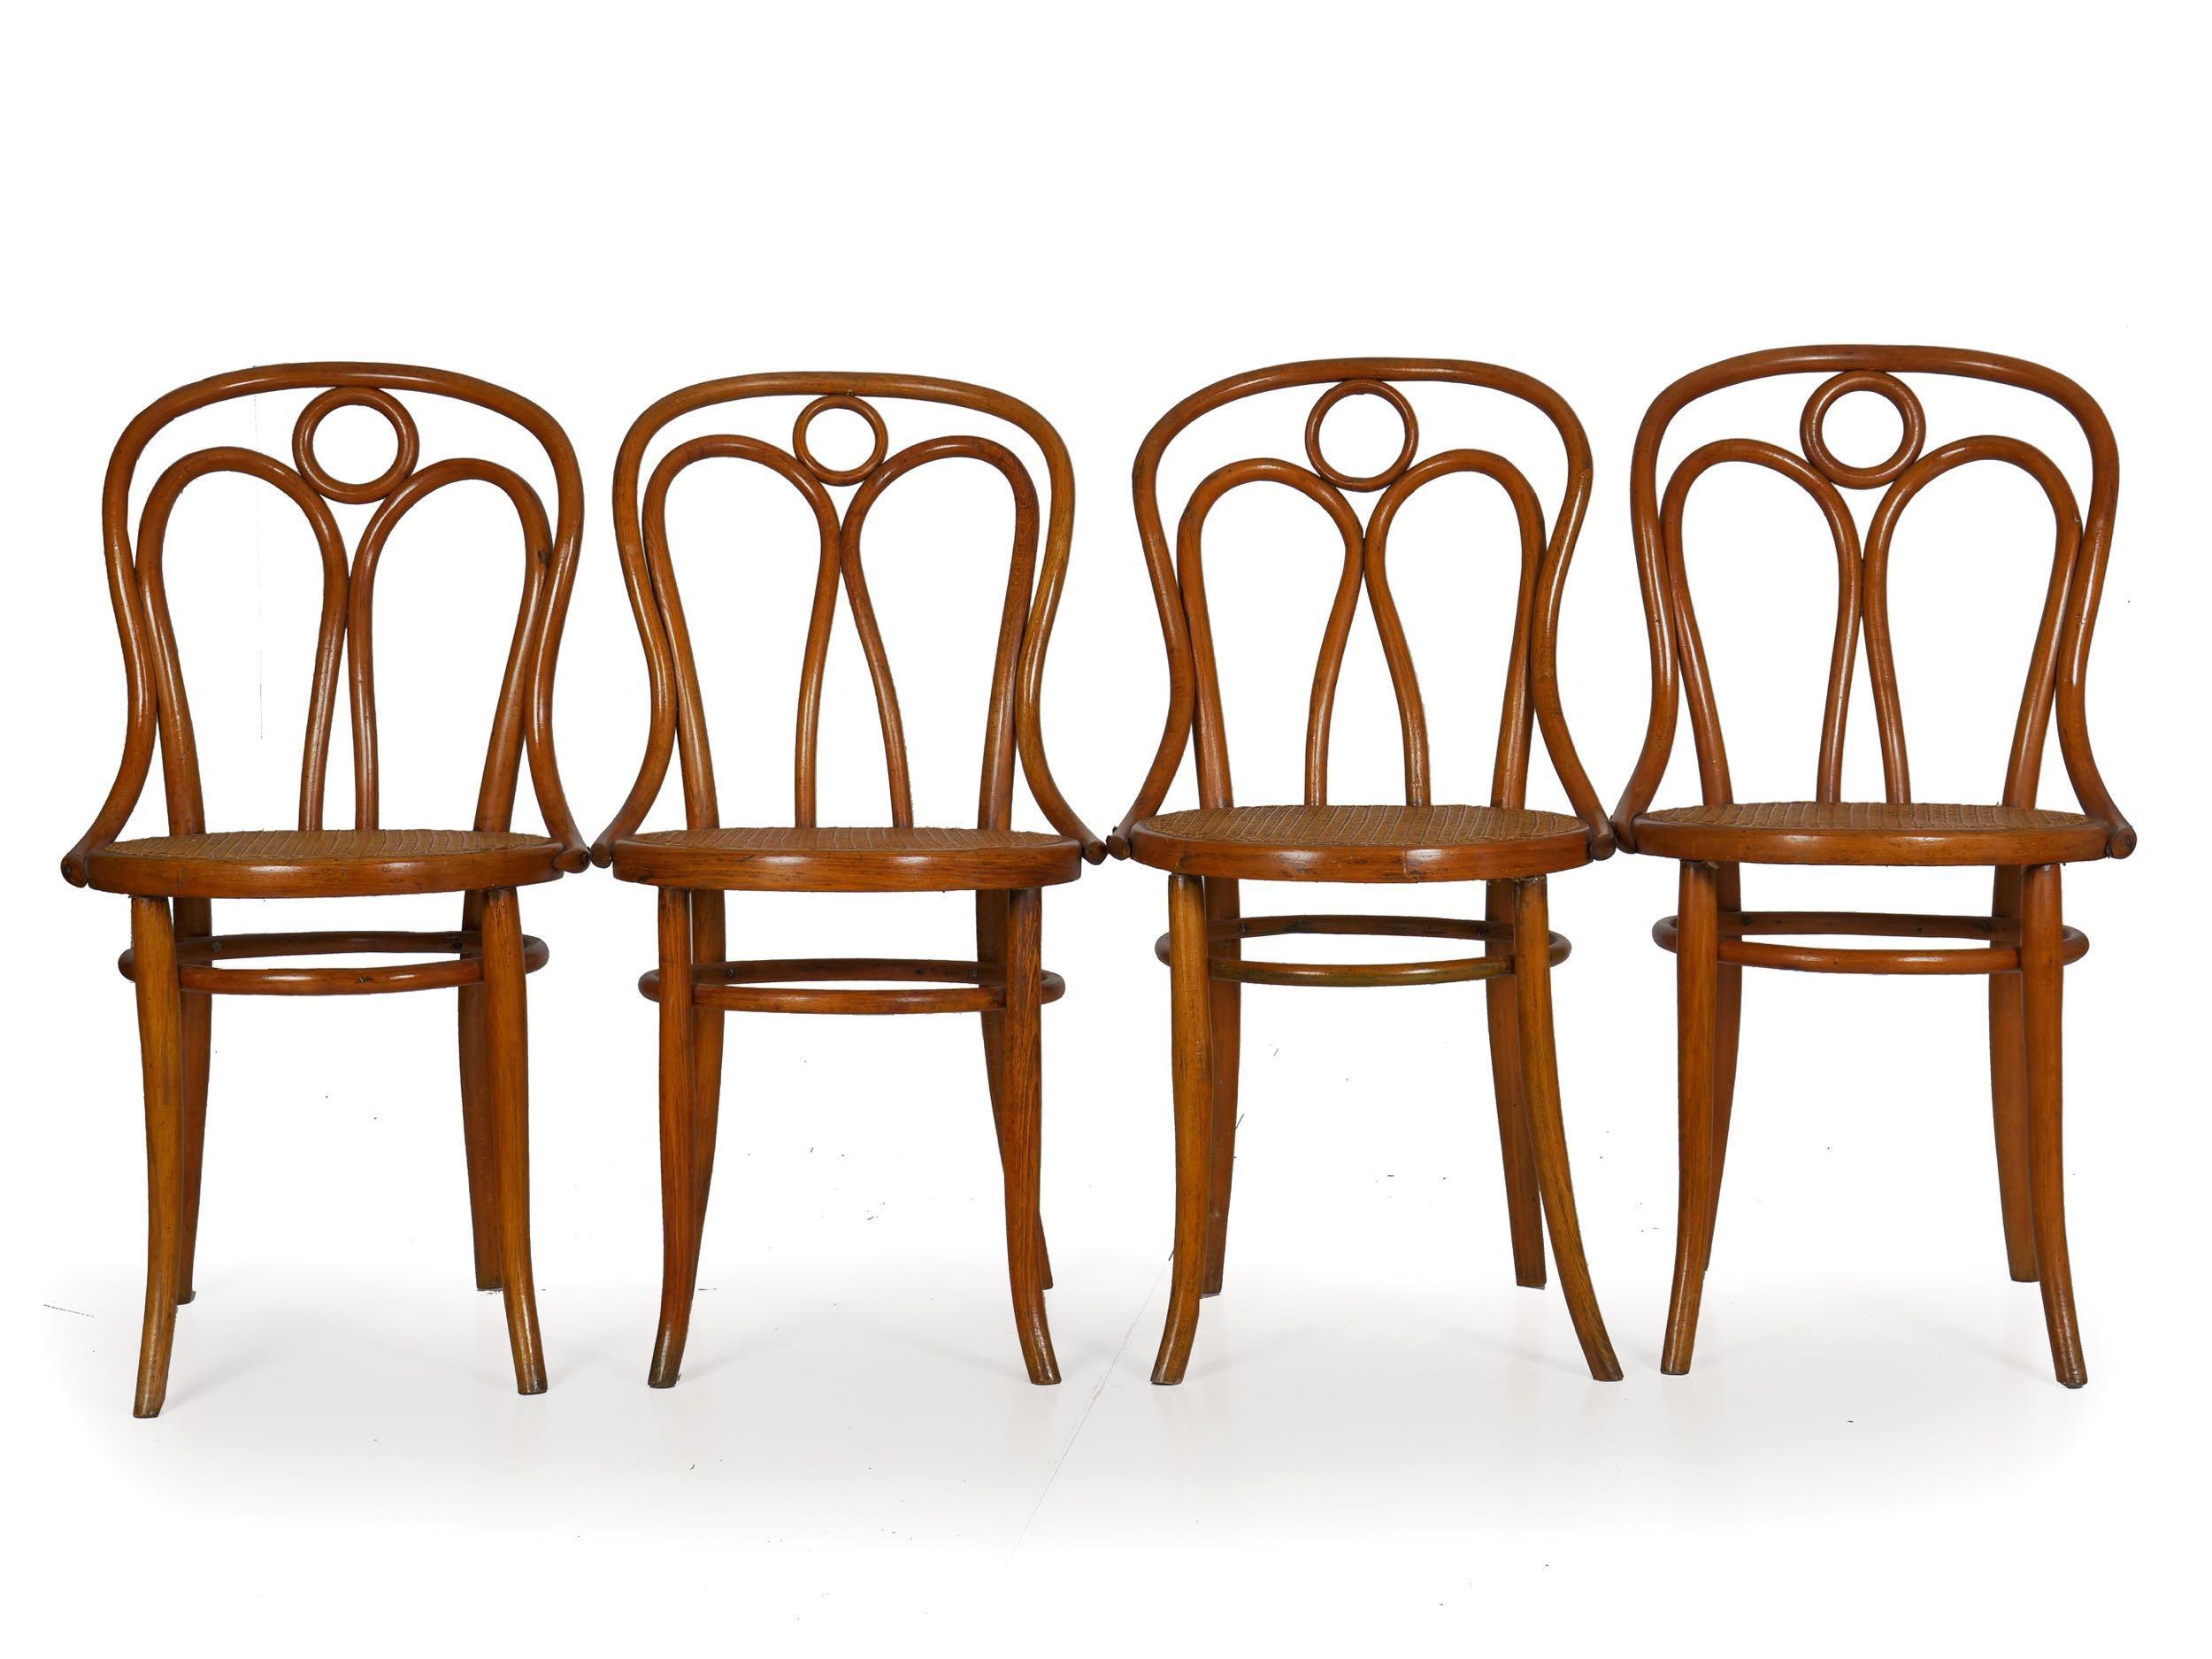 A fine set of late 19th century dining chairs designed by Josef Kohn and manufactured by Mundus, one still retaining the original label remnants, this is offered as no. 36 in his catalogue and is a quite rare form with the little circle in the crest